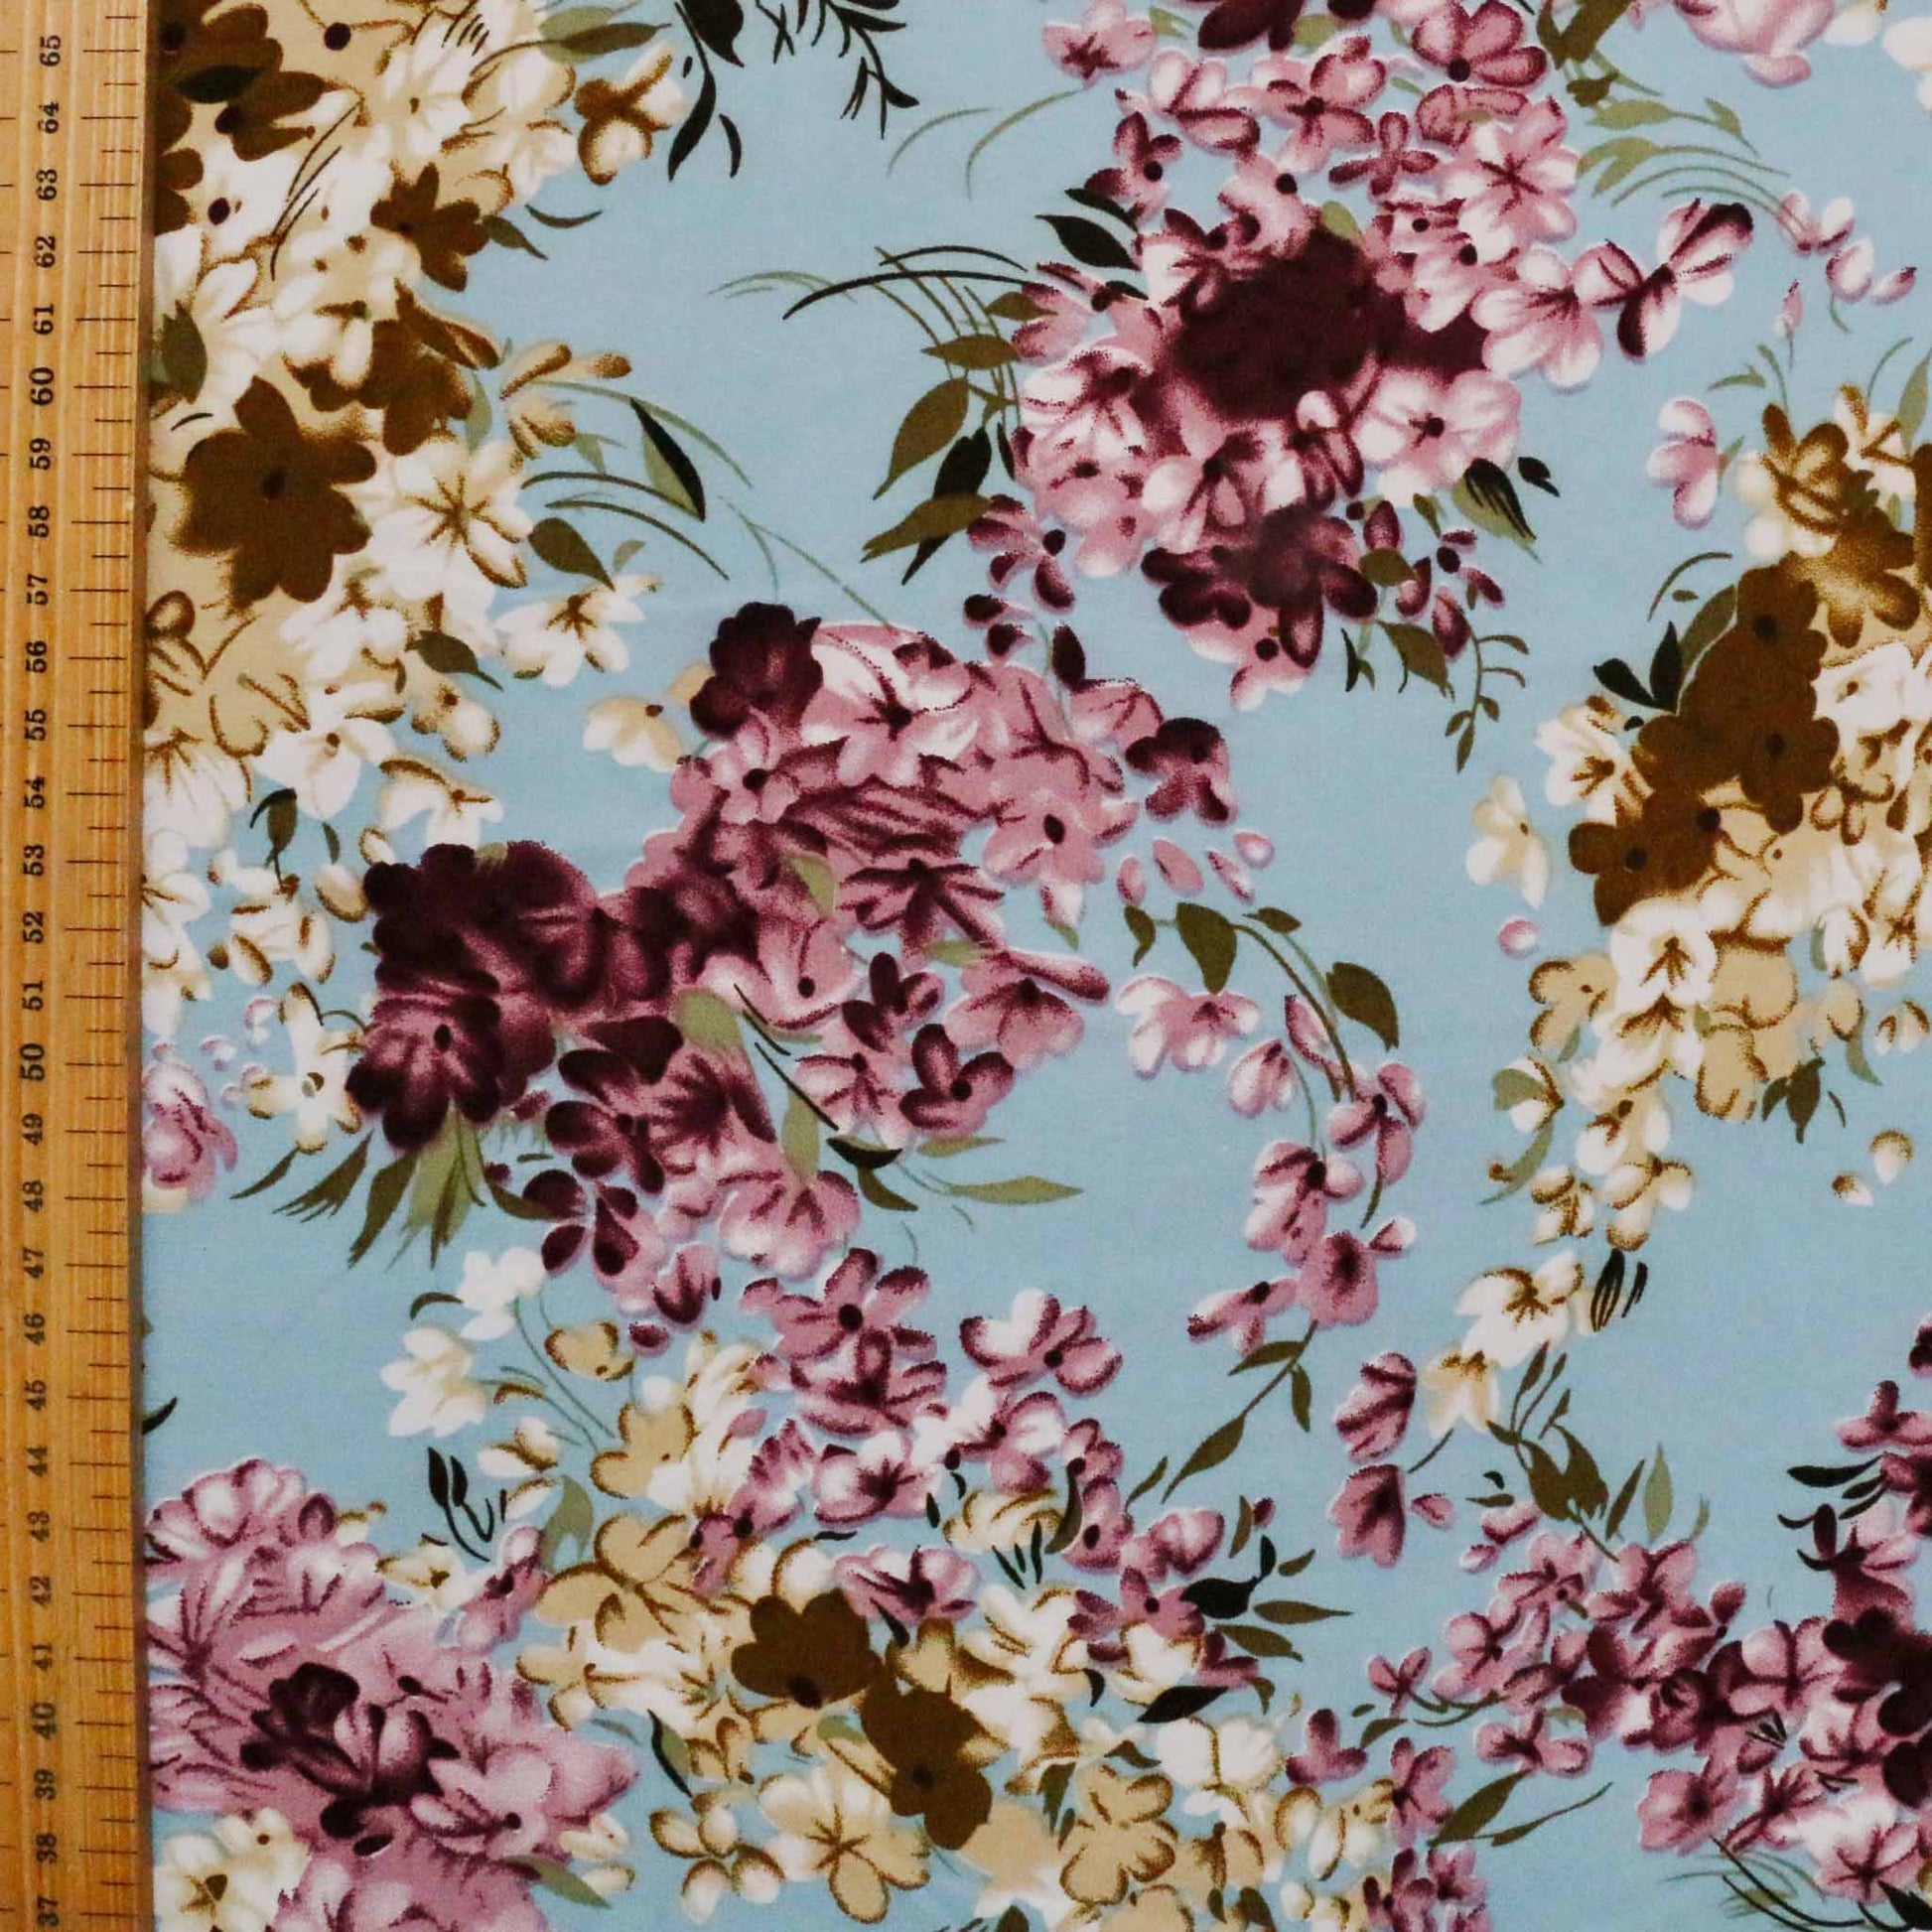 metre chiffon polyester dressmaking fabric in pastel blue with floral print in maroon and beige